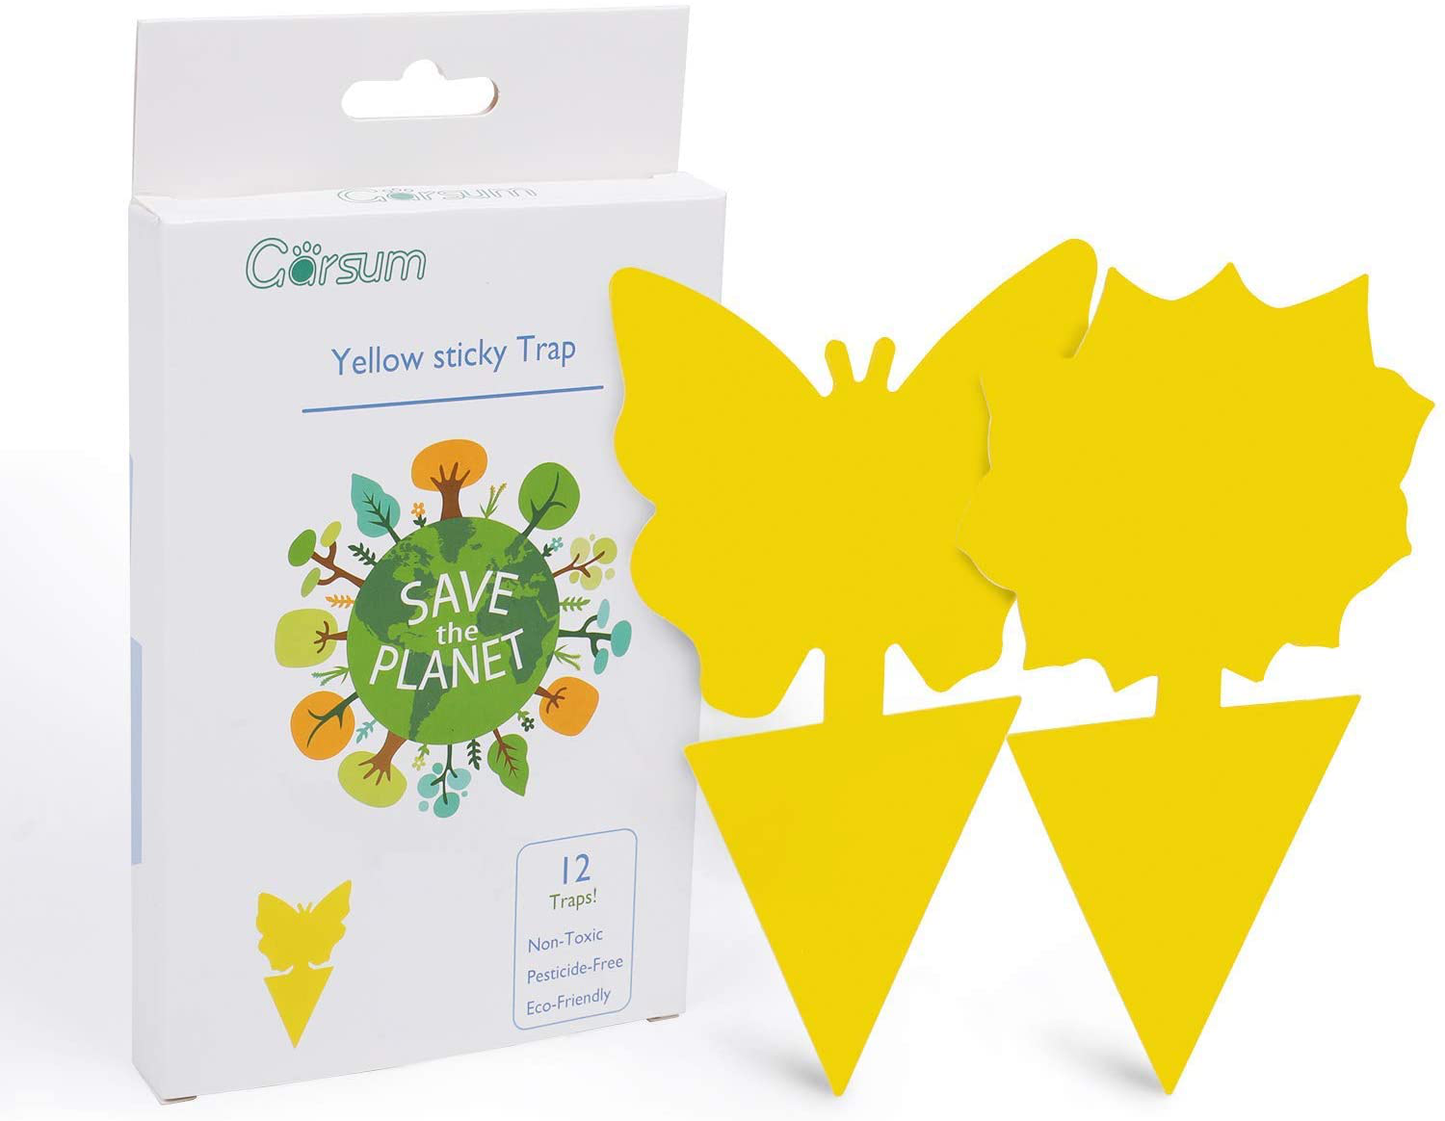 Garsum Sticky Trap,Fruit Fly and Gnat Trap Yellow Sticky Bug Traps for Indoor/Outdoor Use - Insect Catcher for White Flies,Mosquitos,Fungus Gnats,Flying Insects - Disposable Glue Trappers(12 pcs)